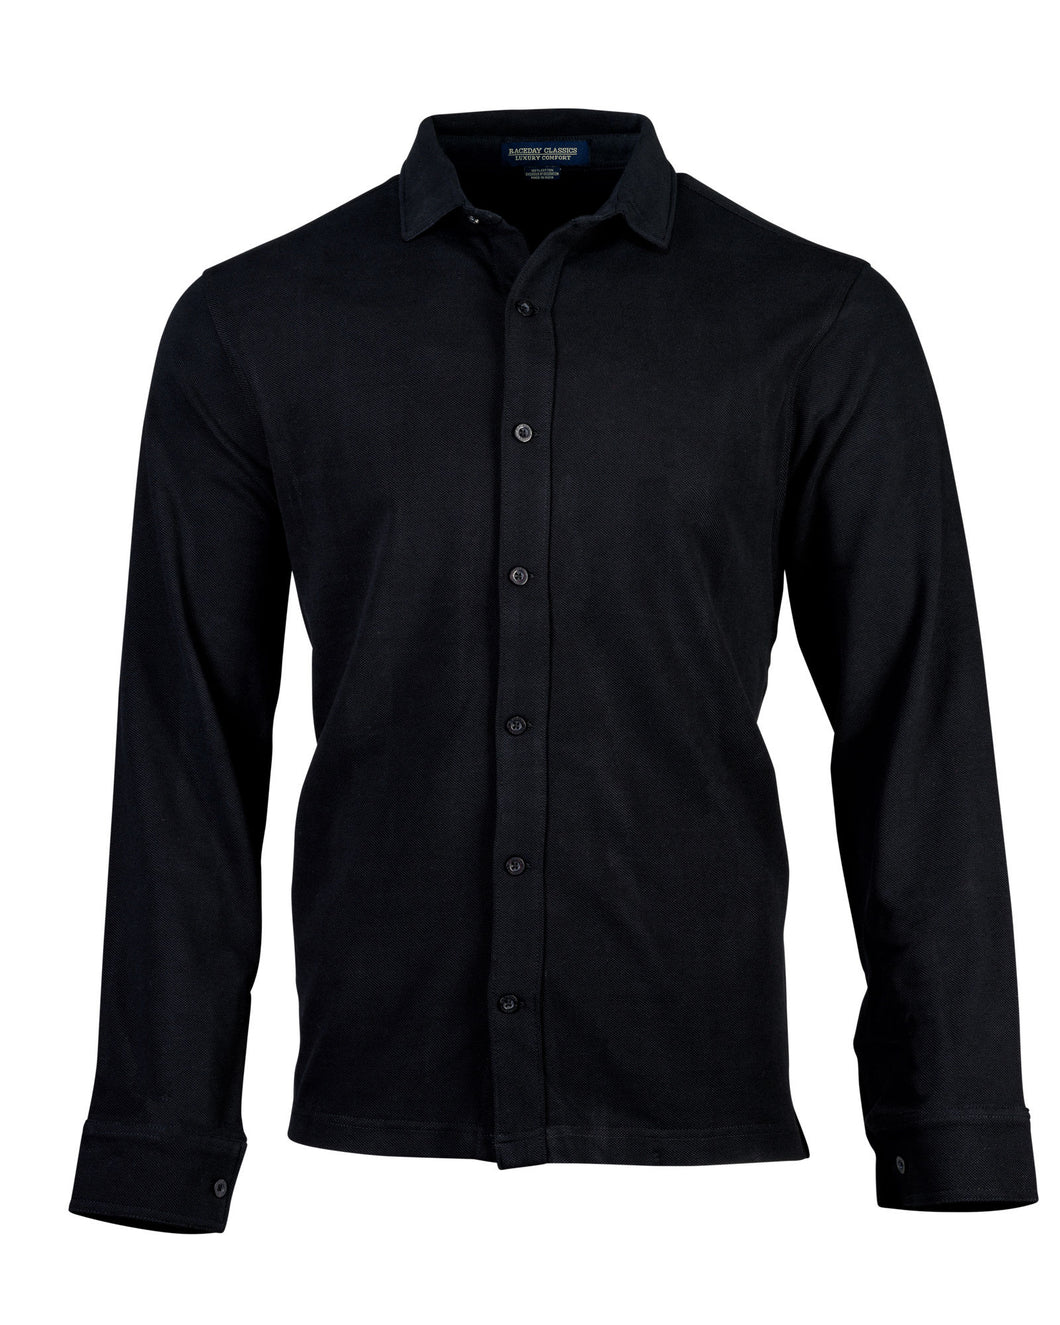 Luxury Black Button-Down Shirt, Long Sleeve, Thick Cotton, Regular Fit